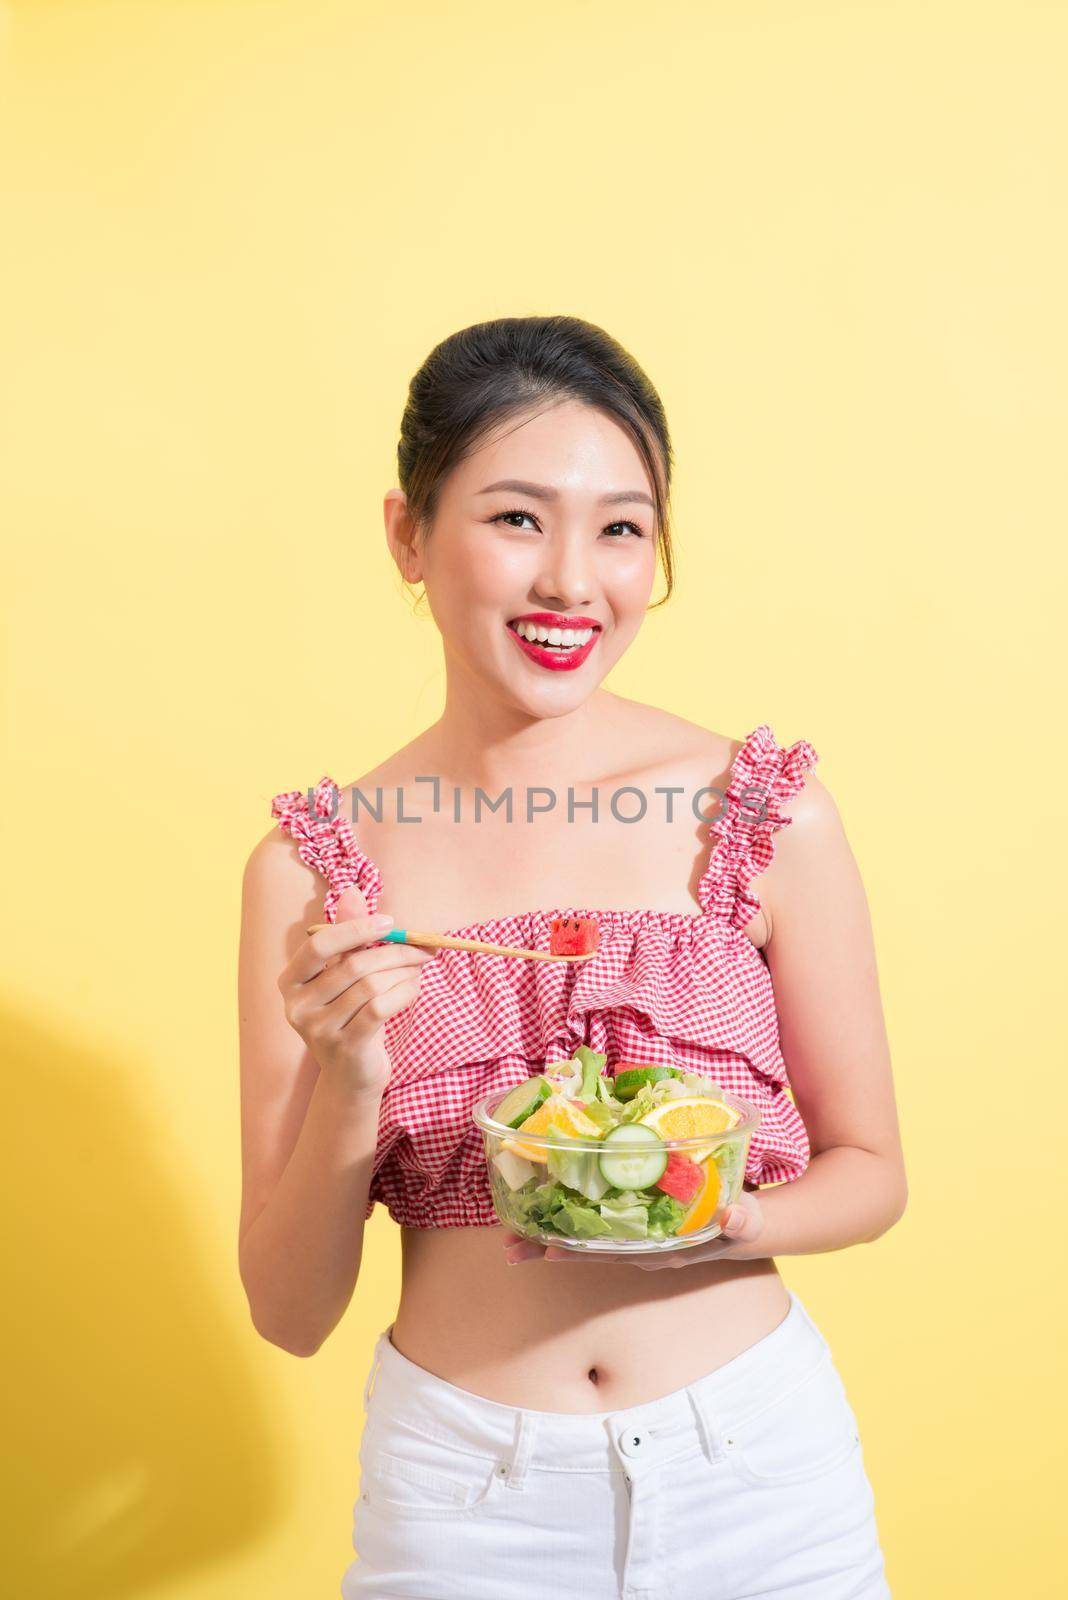 Fashion portrait of young fashionable woman in summer outfit posing with bowl of salad by makidotvn